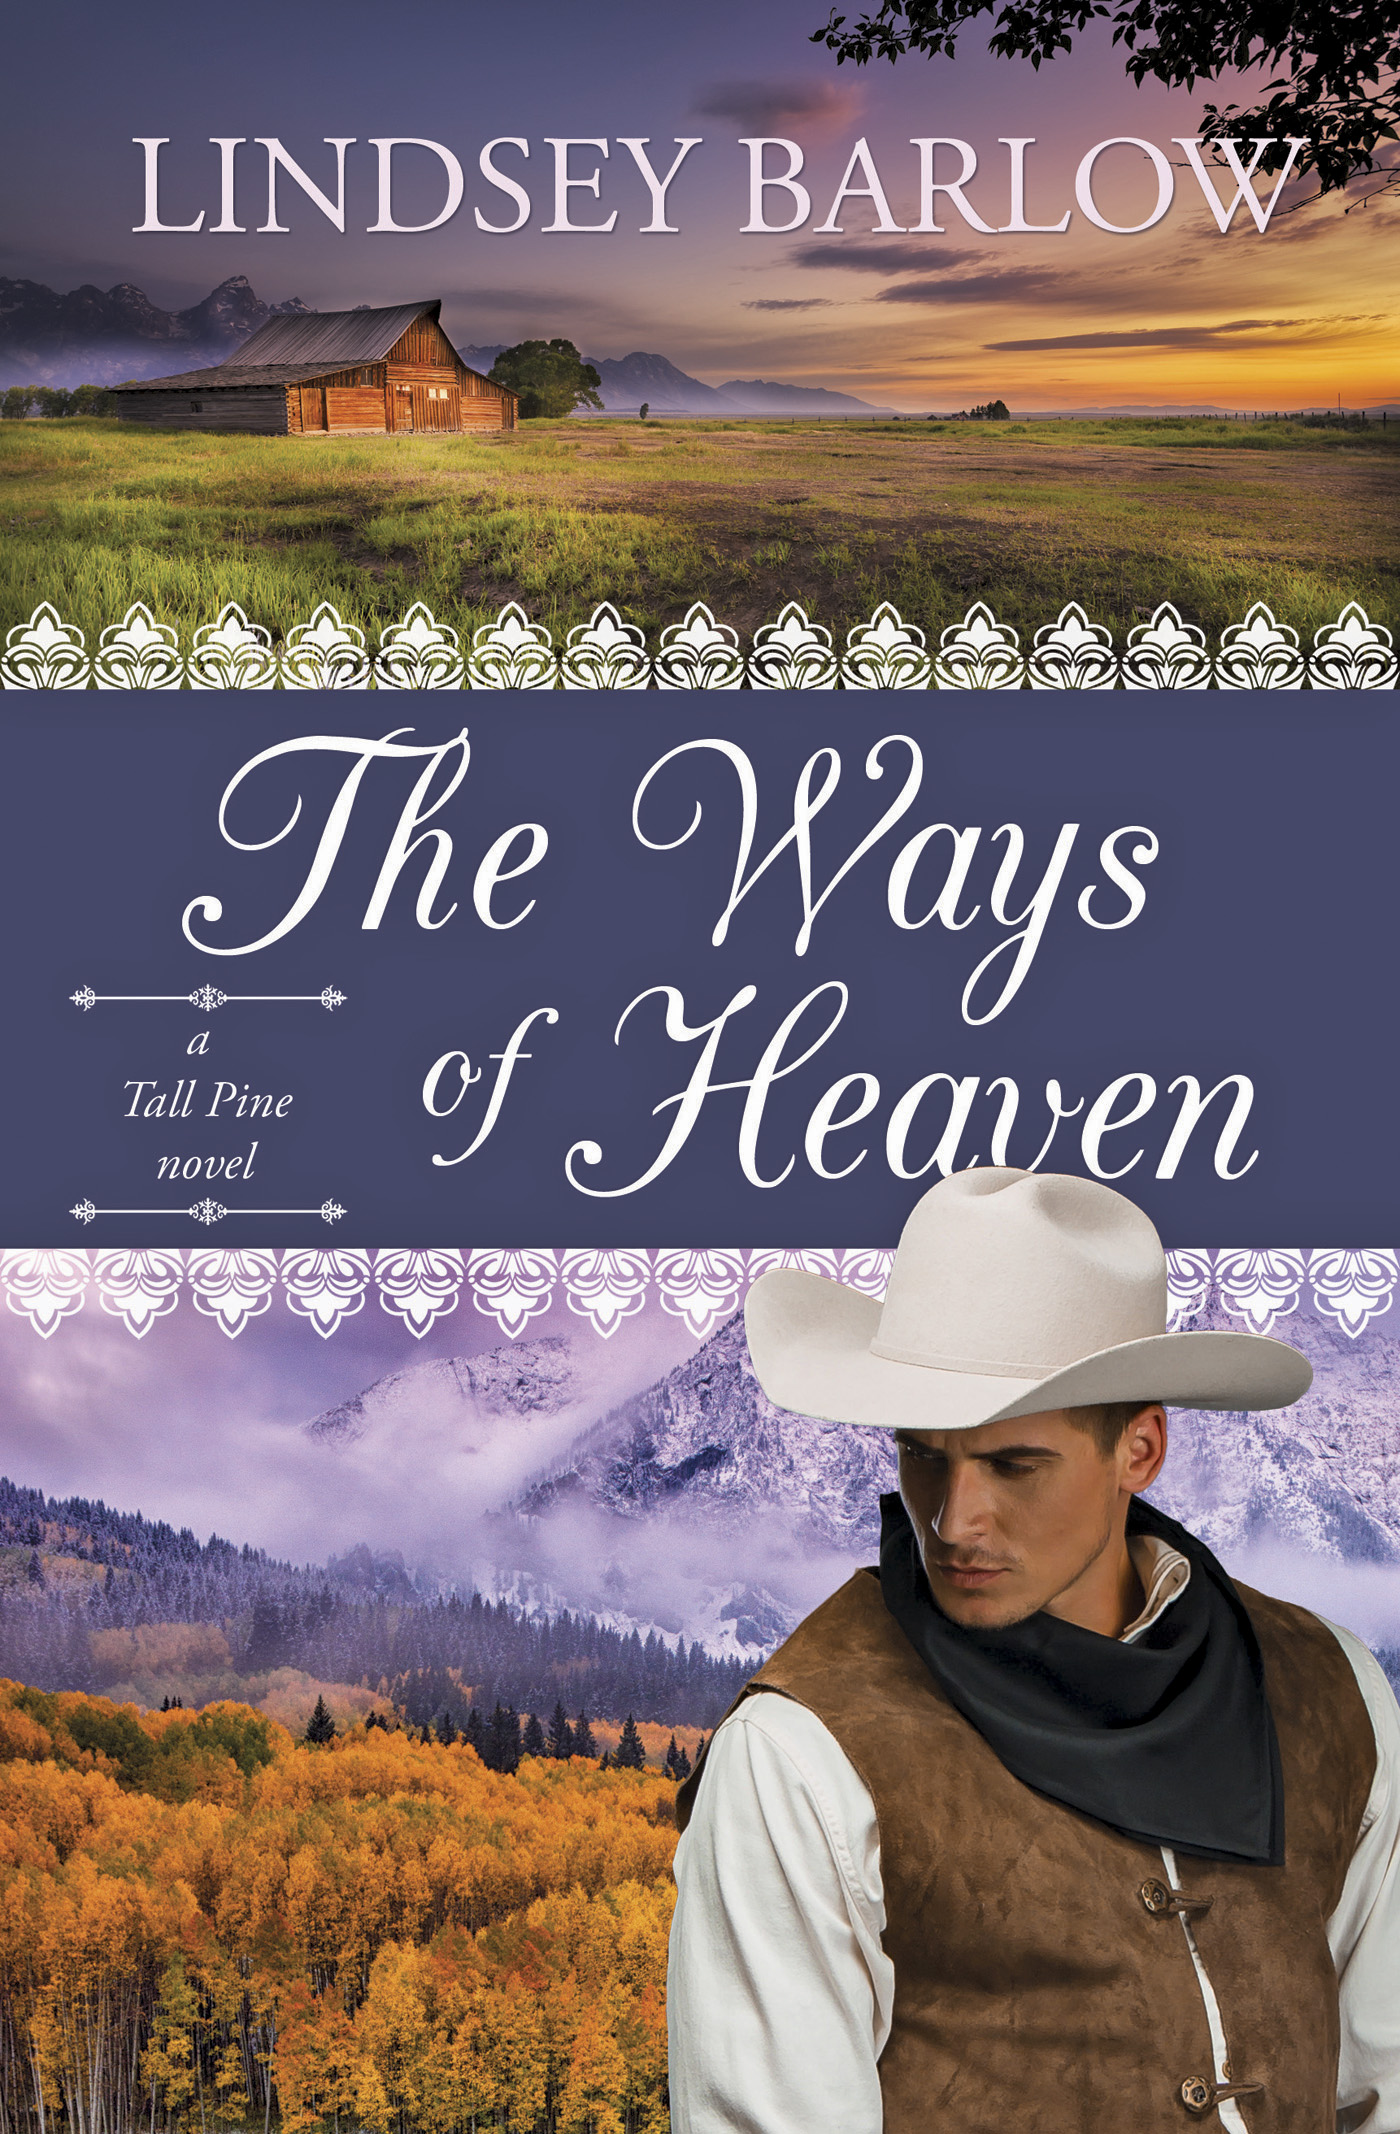 This image is the cover for the book The Ways of Heaven, Tall Pine